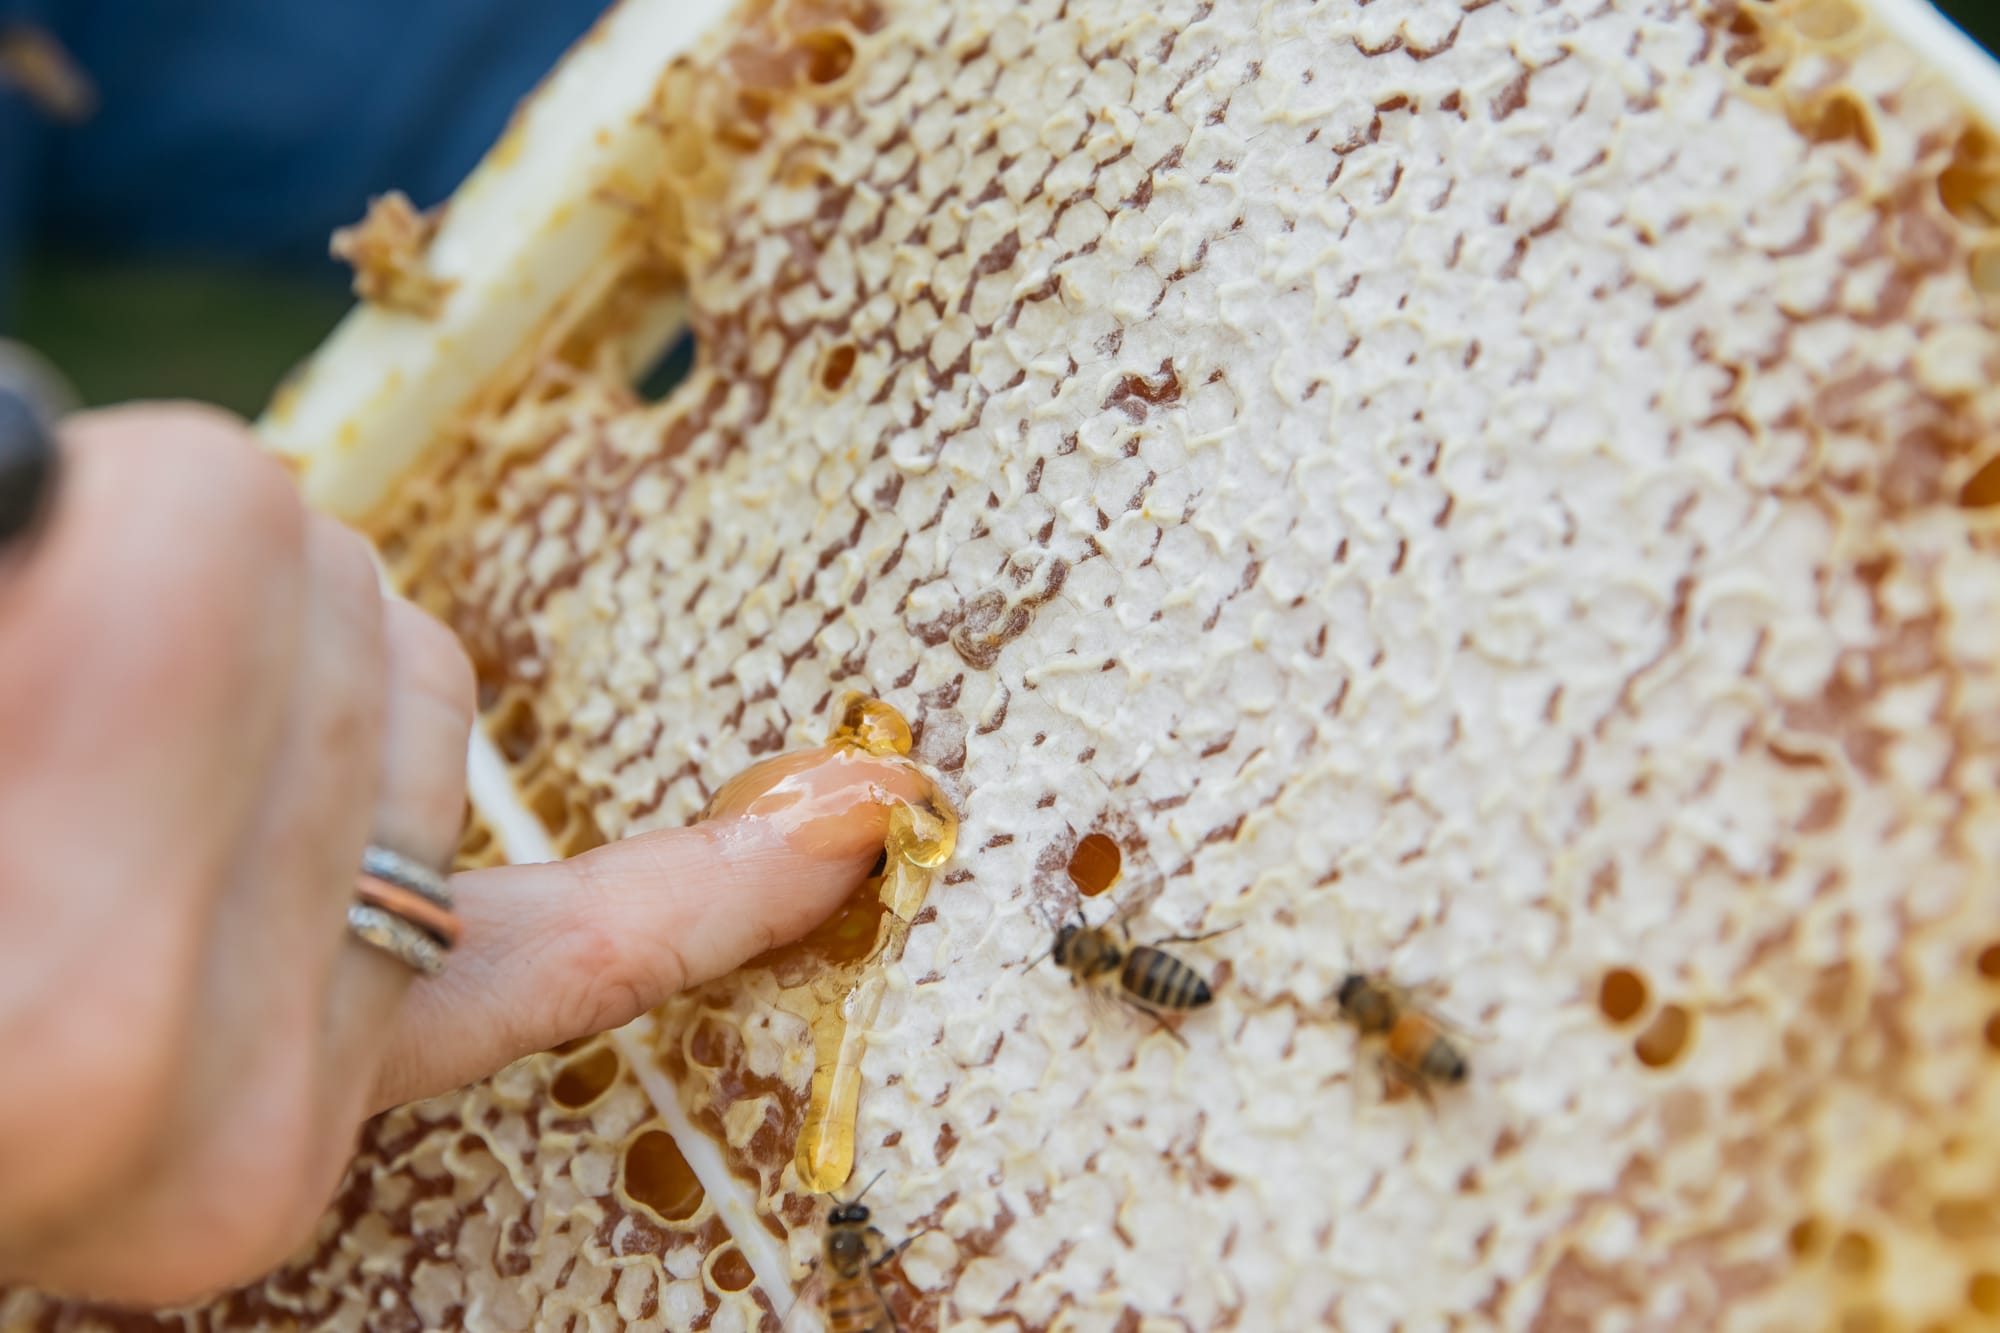 Buzz and bling: do bees follow the money?